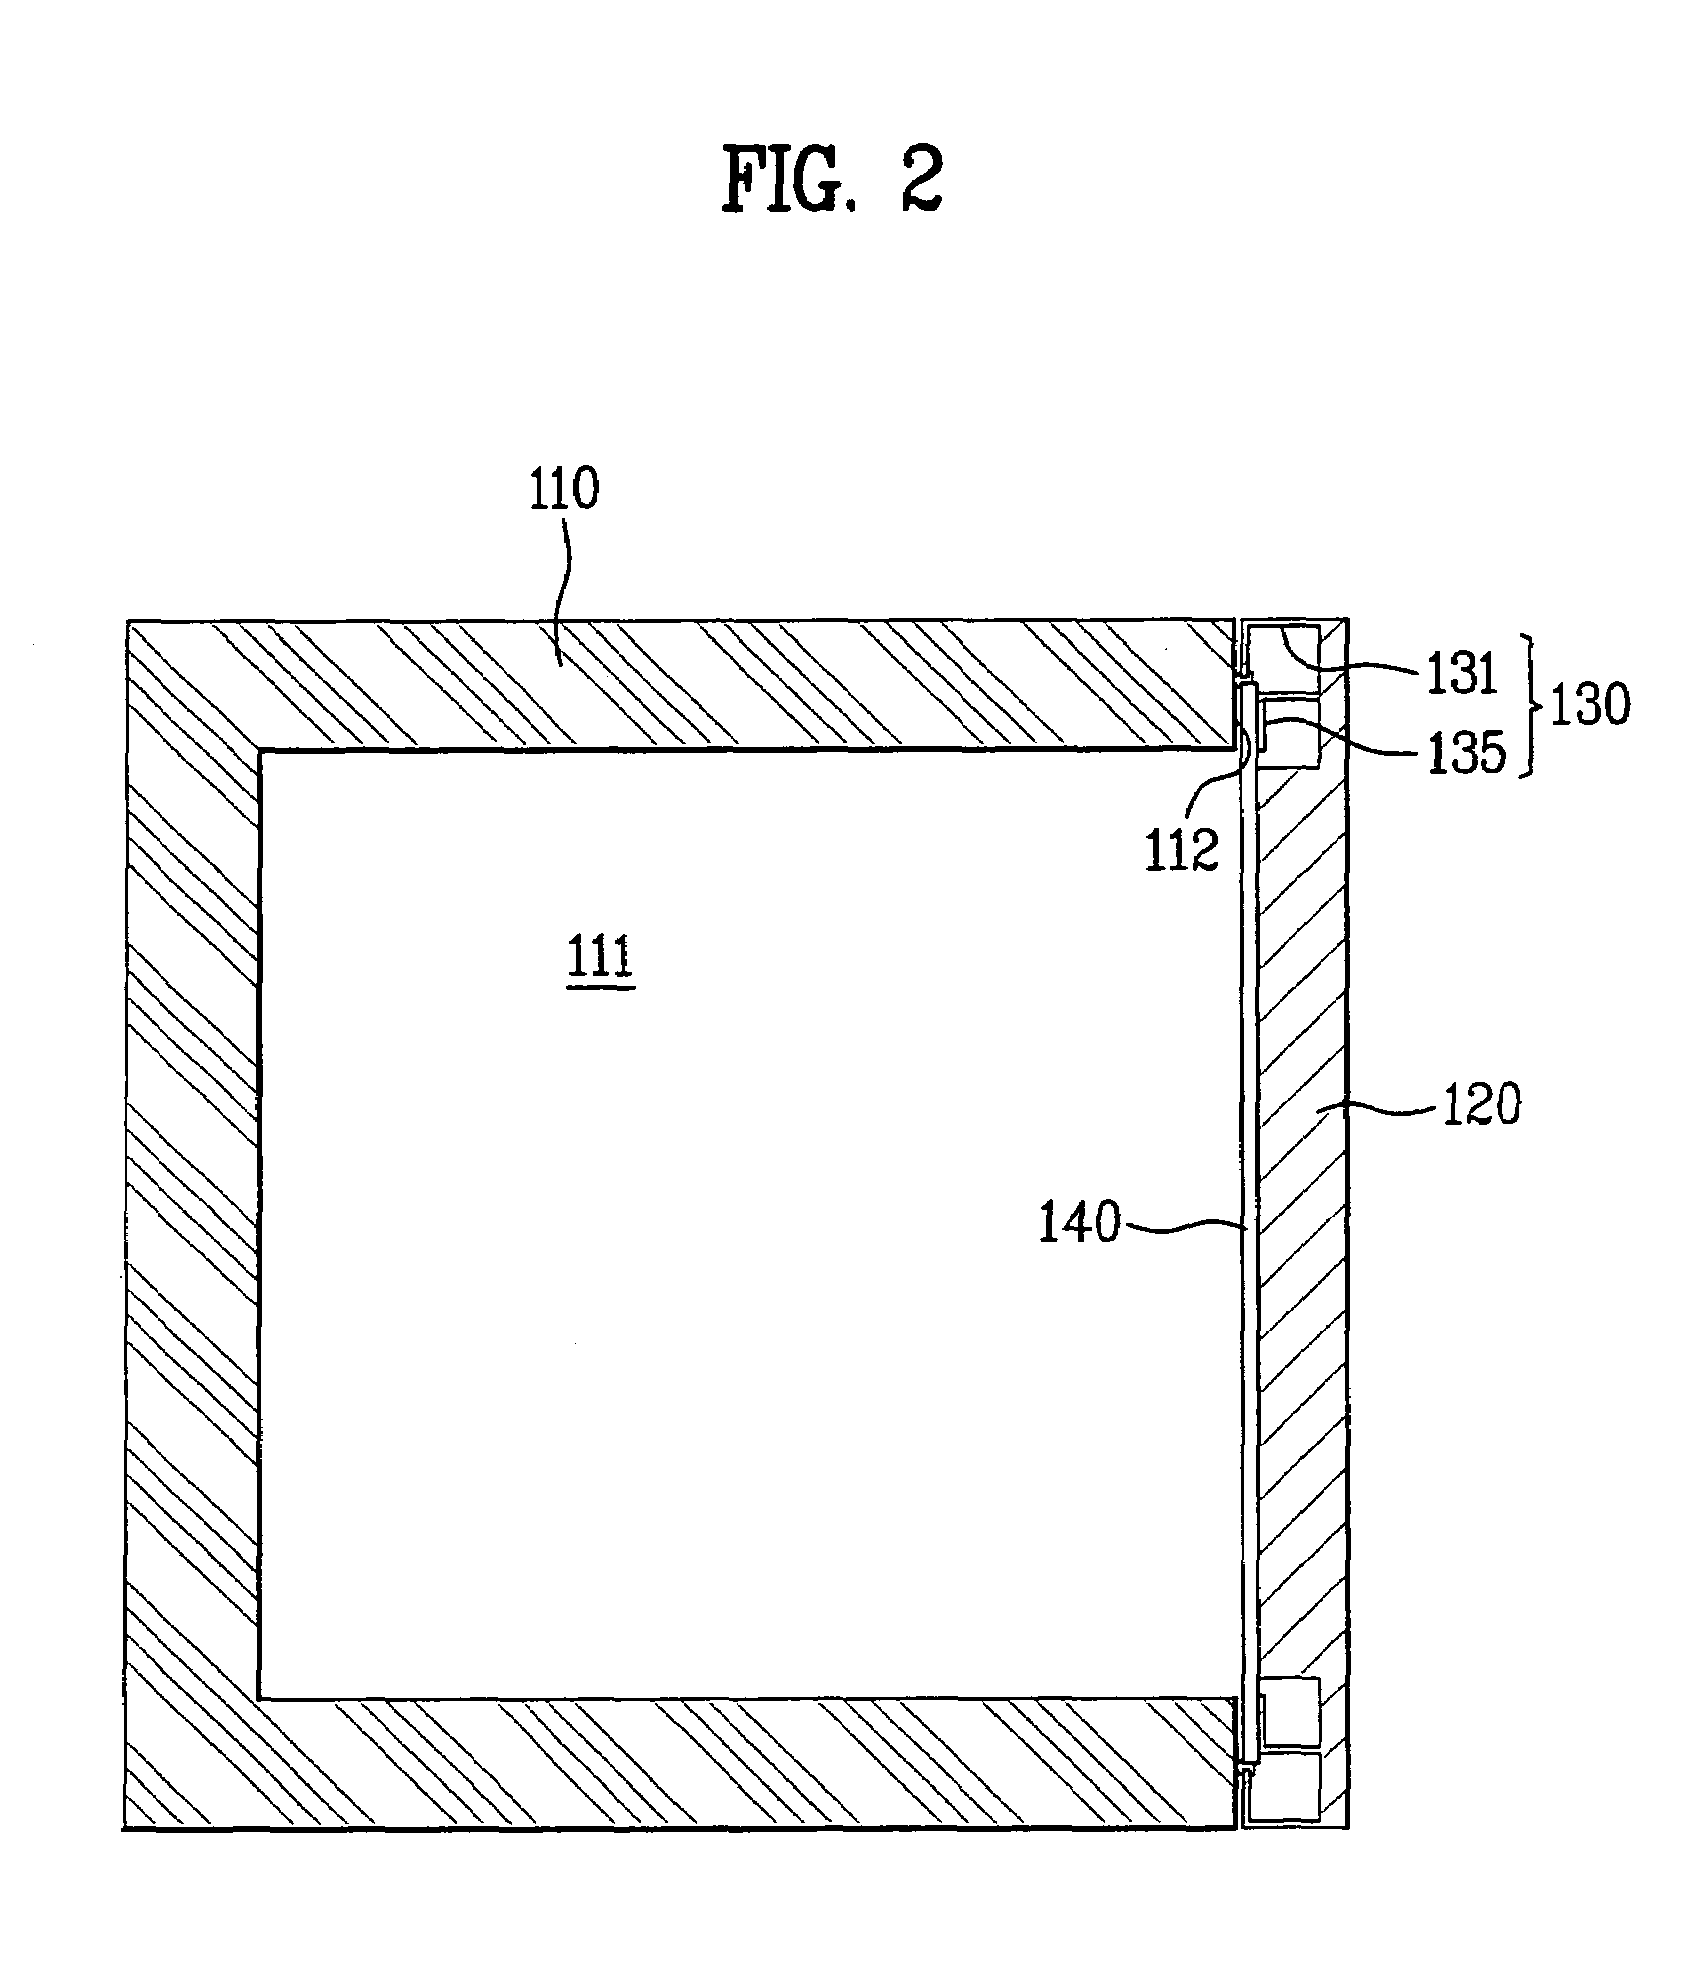 Heating apparatus using electromagnetic wave